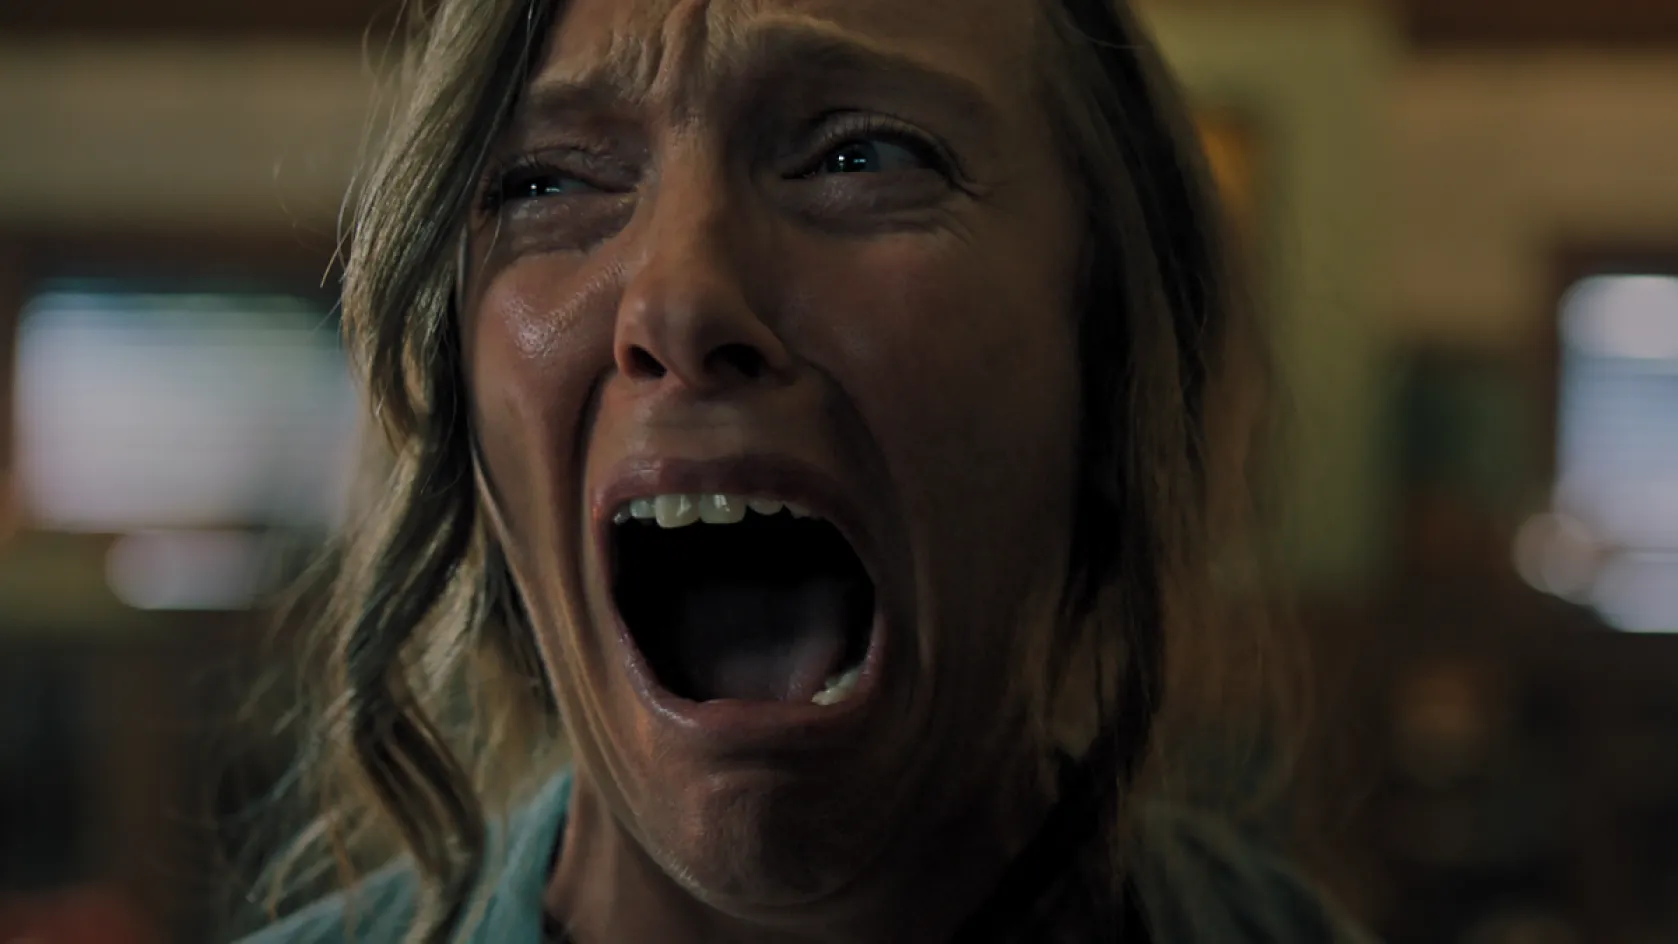 Annie (Toni Collette) screaming in Hereditary